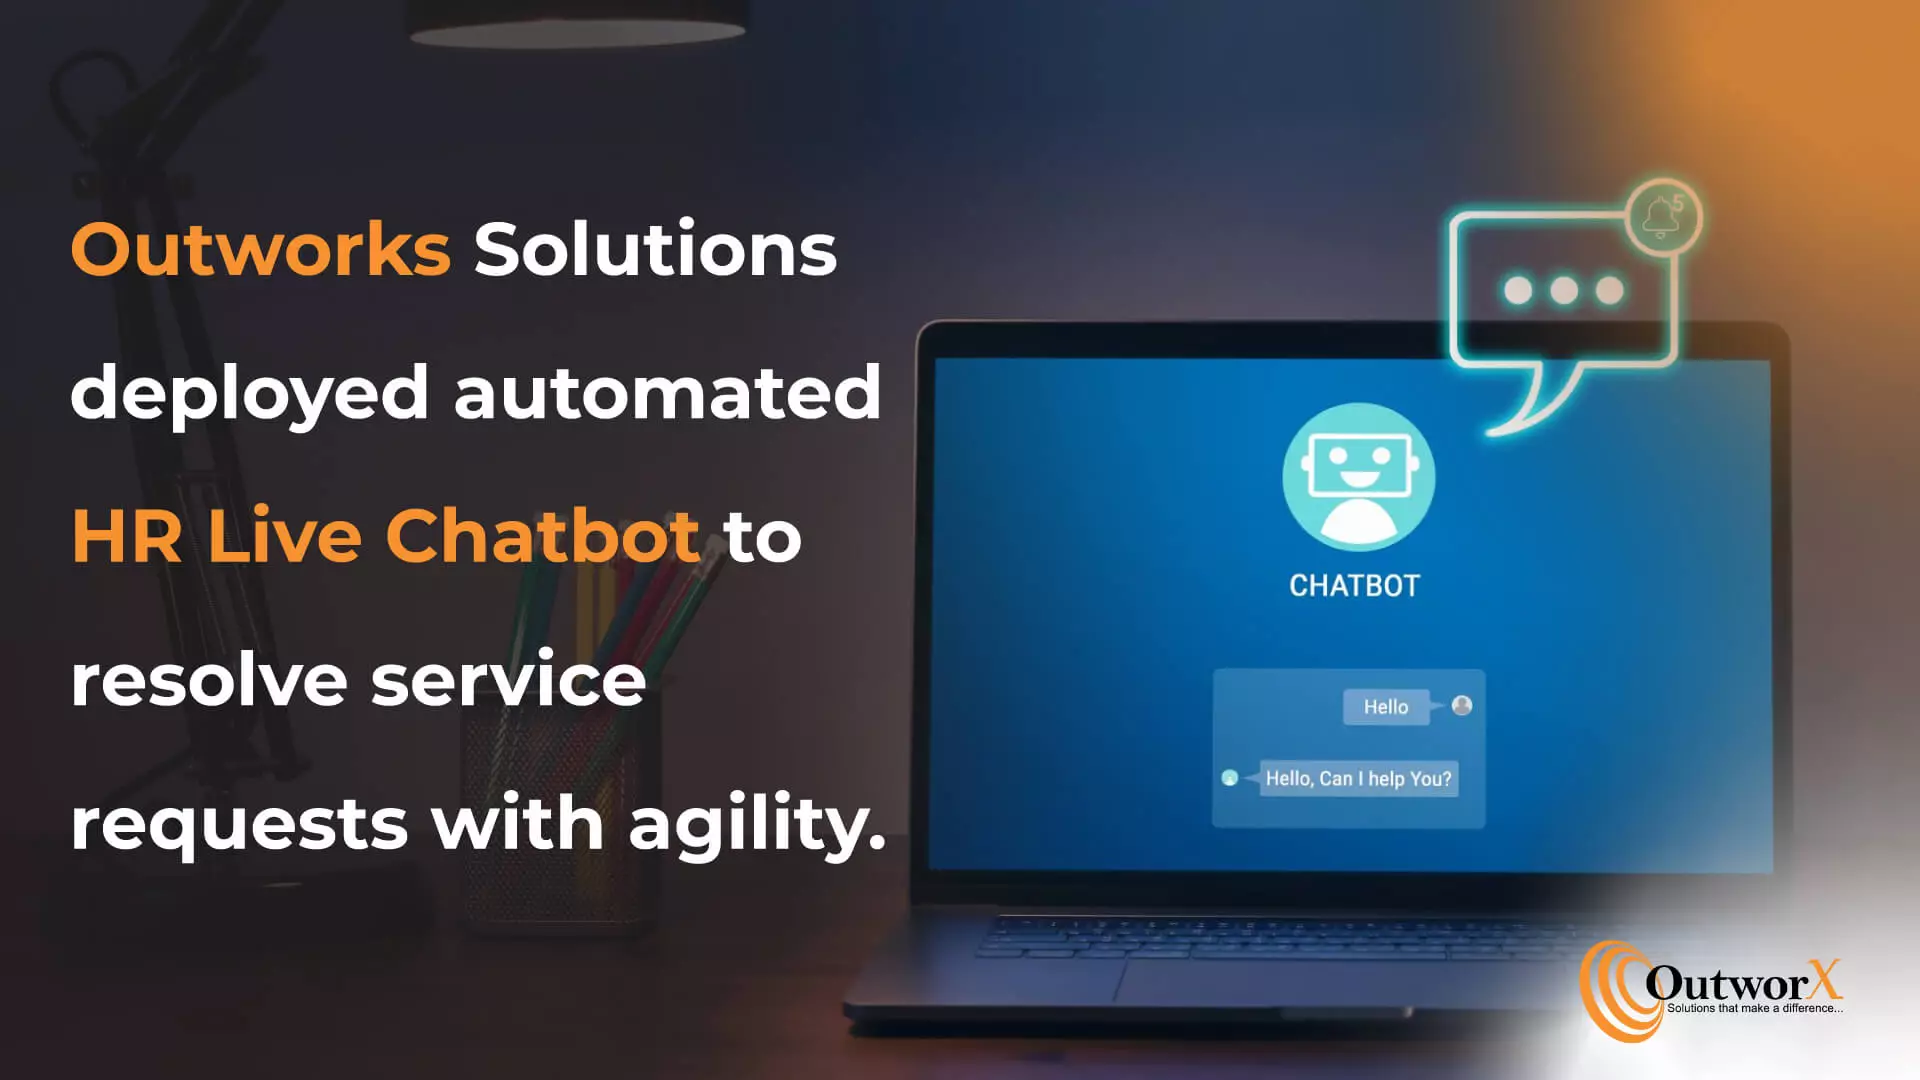 chatbot service providers, chatbot development, chatbot implementation, outworks solutions, technology blogs, outworx corporation